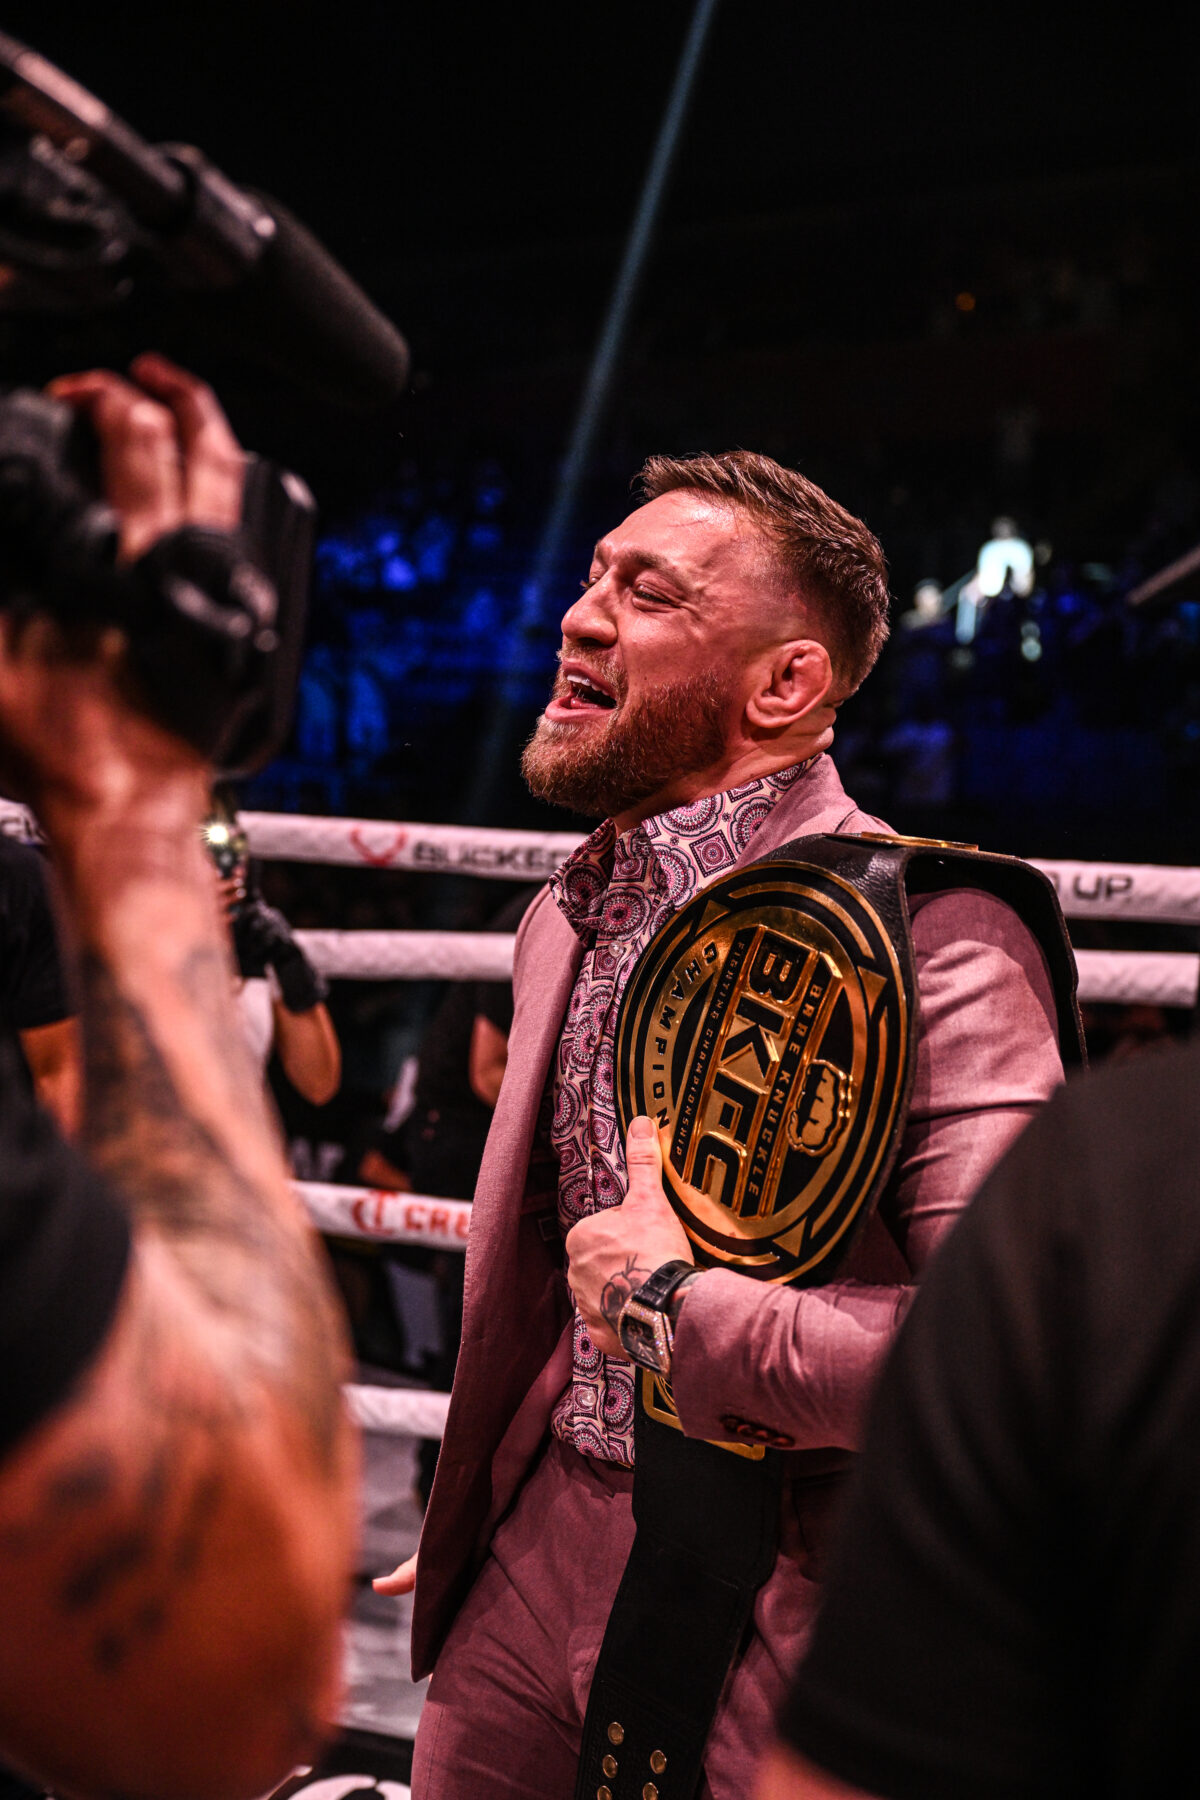 Dana White ‘all good’ with Conor McGregor’s BKFC 41 appearance: ‘The guy is out having fun’